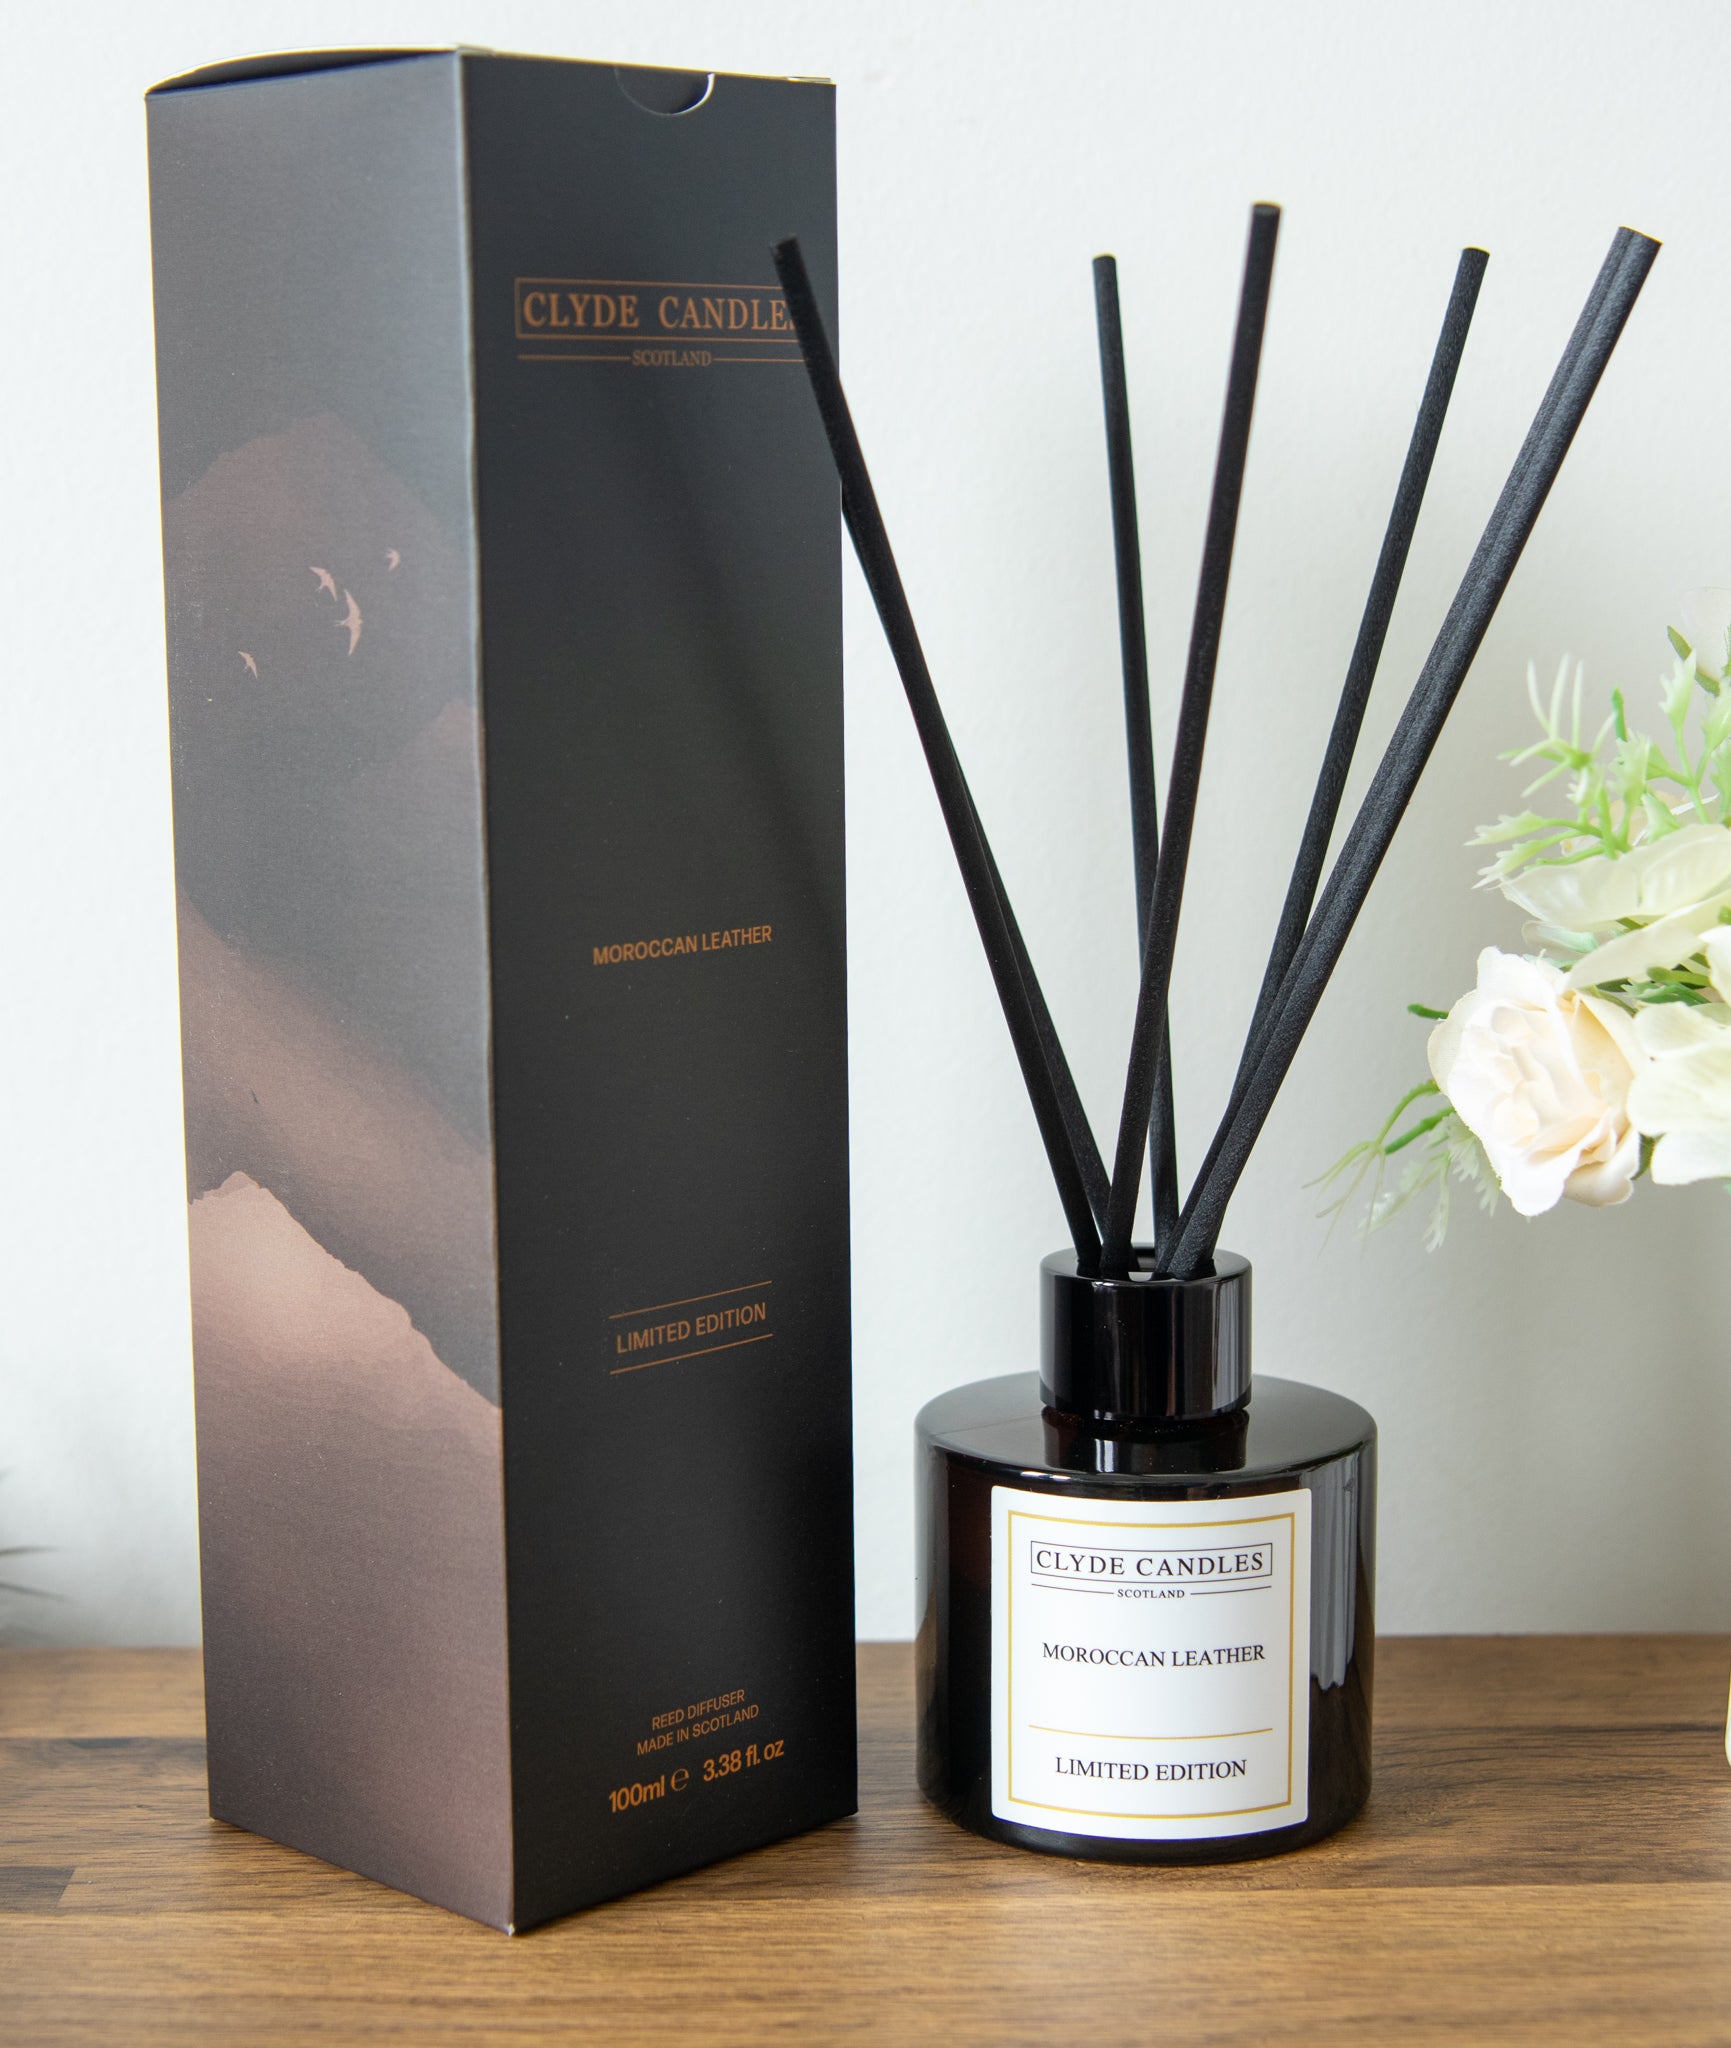 Moroccan Leather Reed Diffuser - Clyde Candles, Luxury Diffuser Oil with a Set of 7 Fibre Sticks, 100ml, Best Aroma Scent for Home, Kitchen, Living Room, Bathroom. Fragrance Diffusers set with sticks